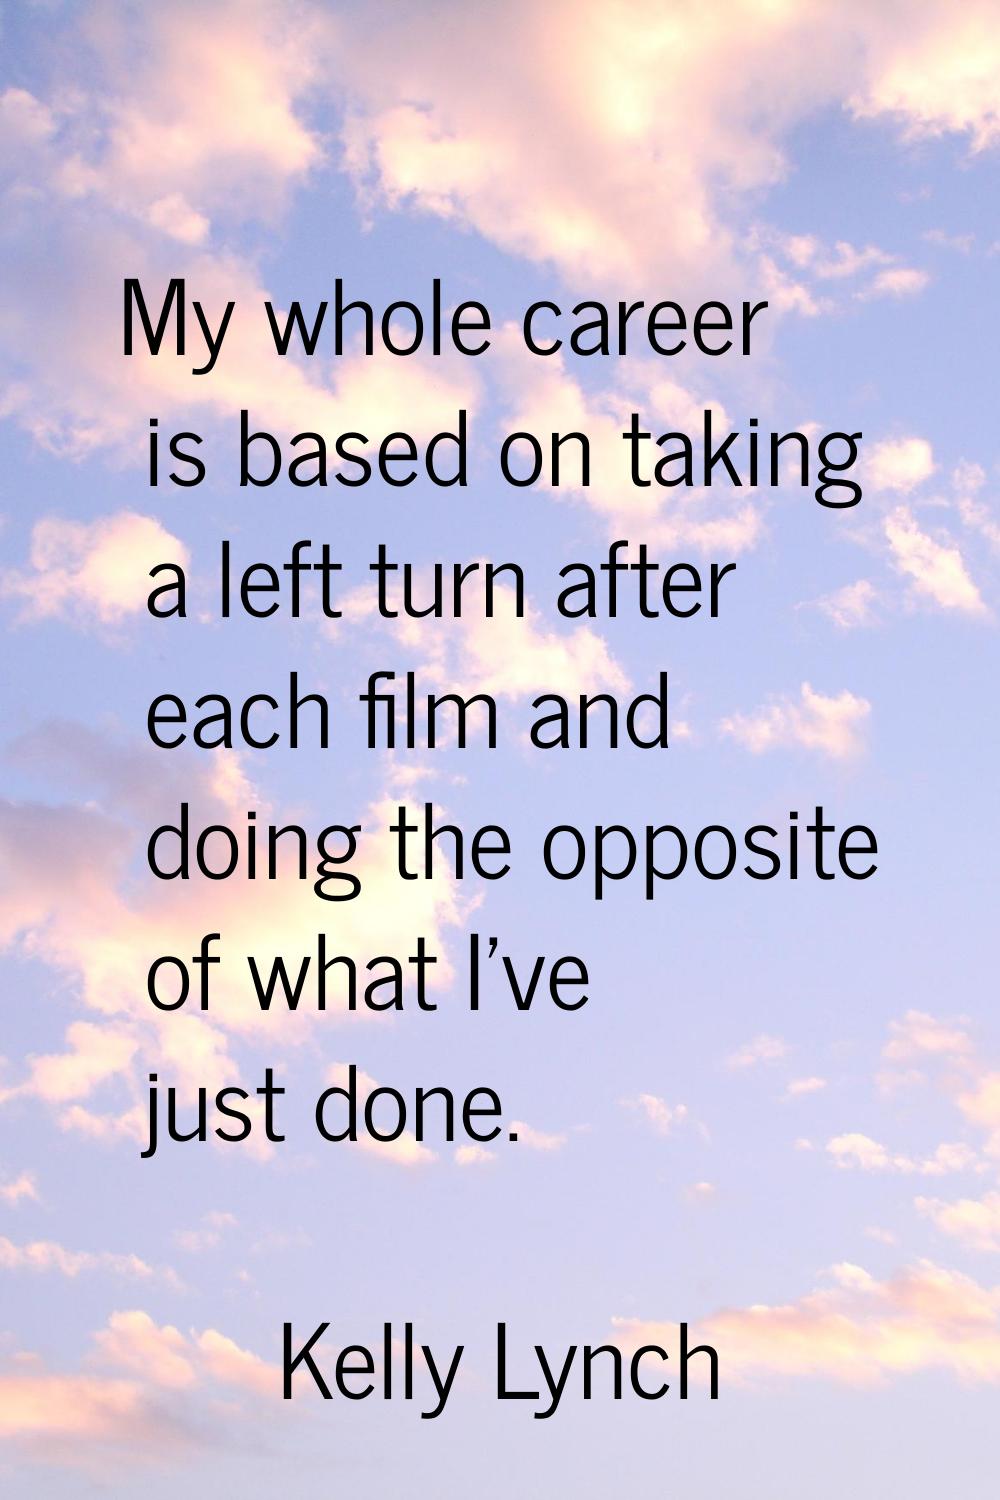 My whole career is based on taking a left turn after each film and doing the opposite of what I've 